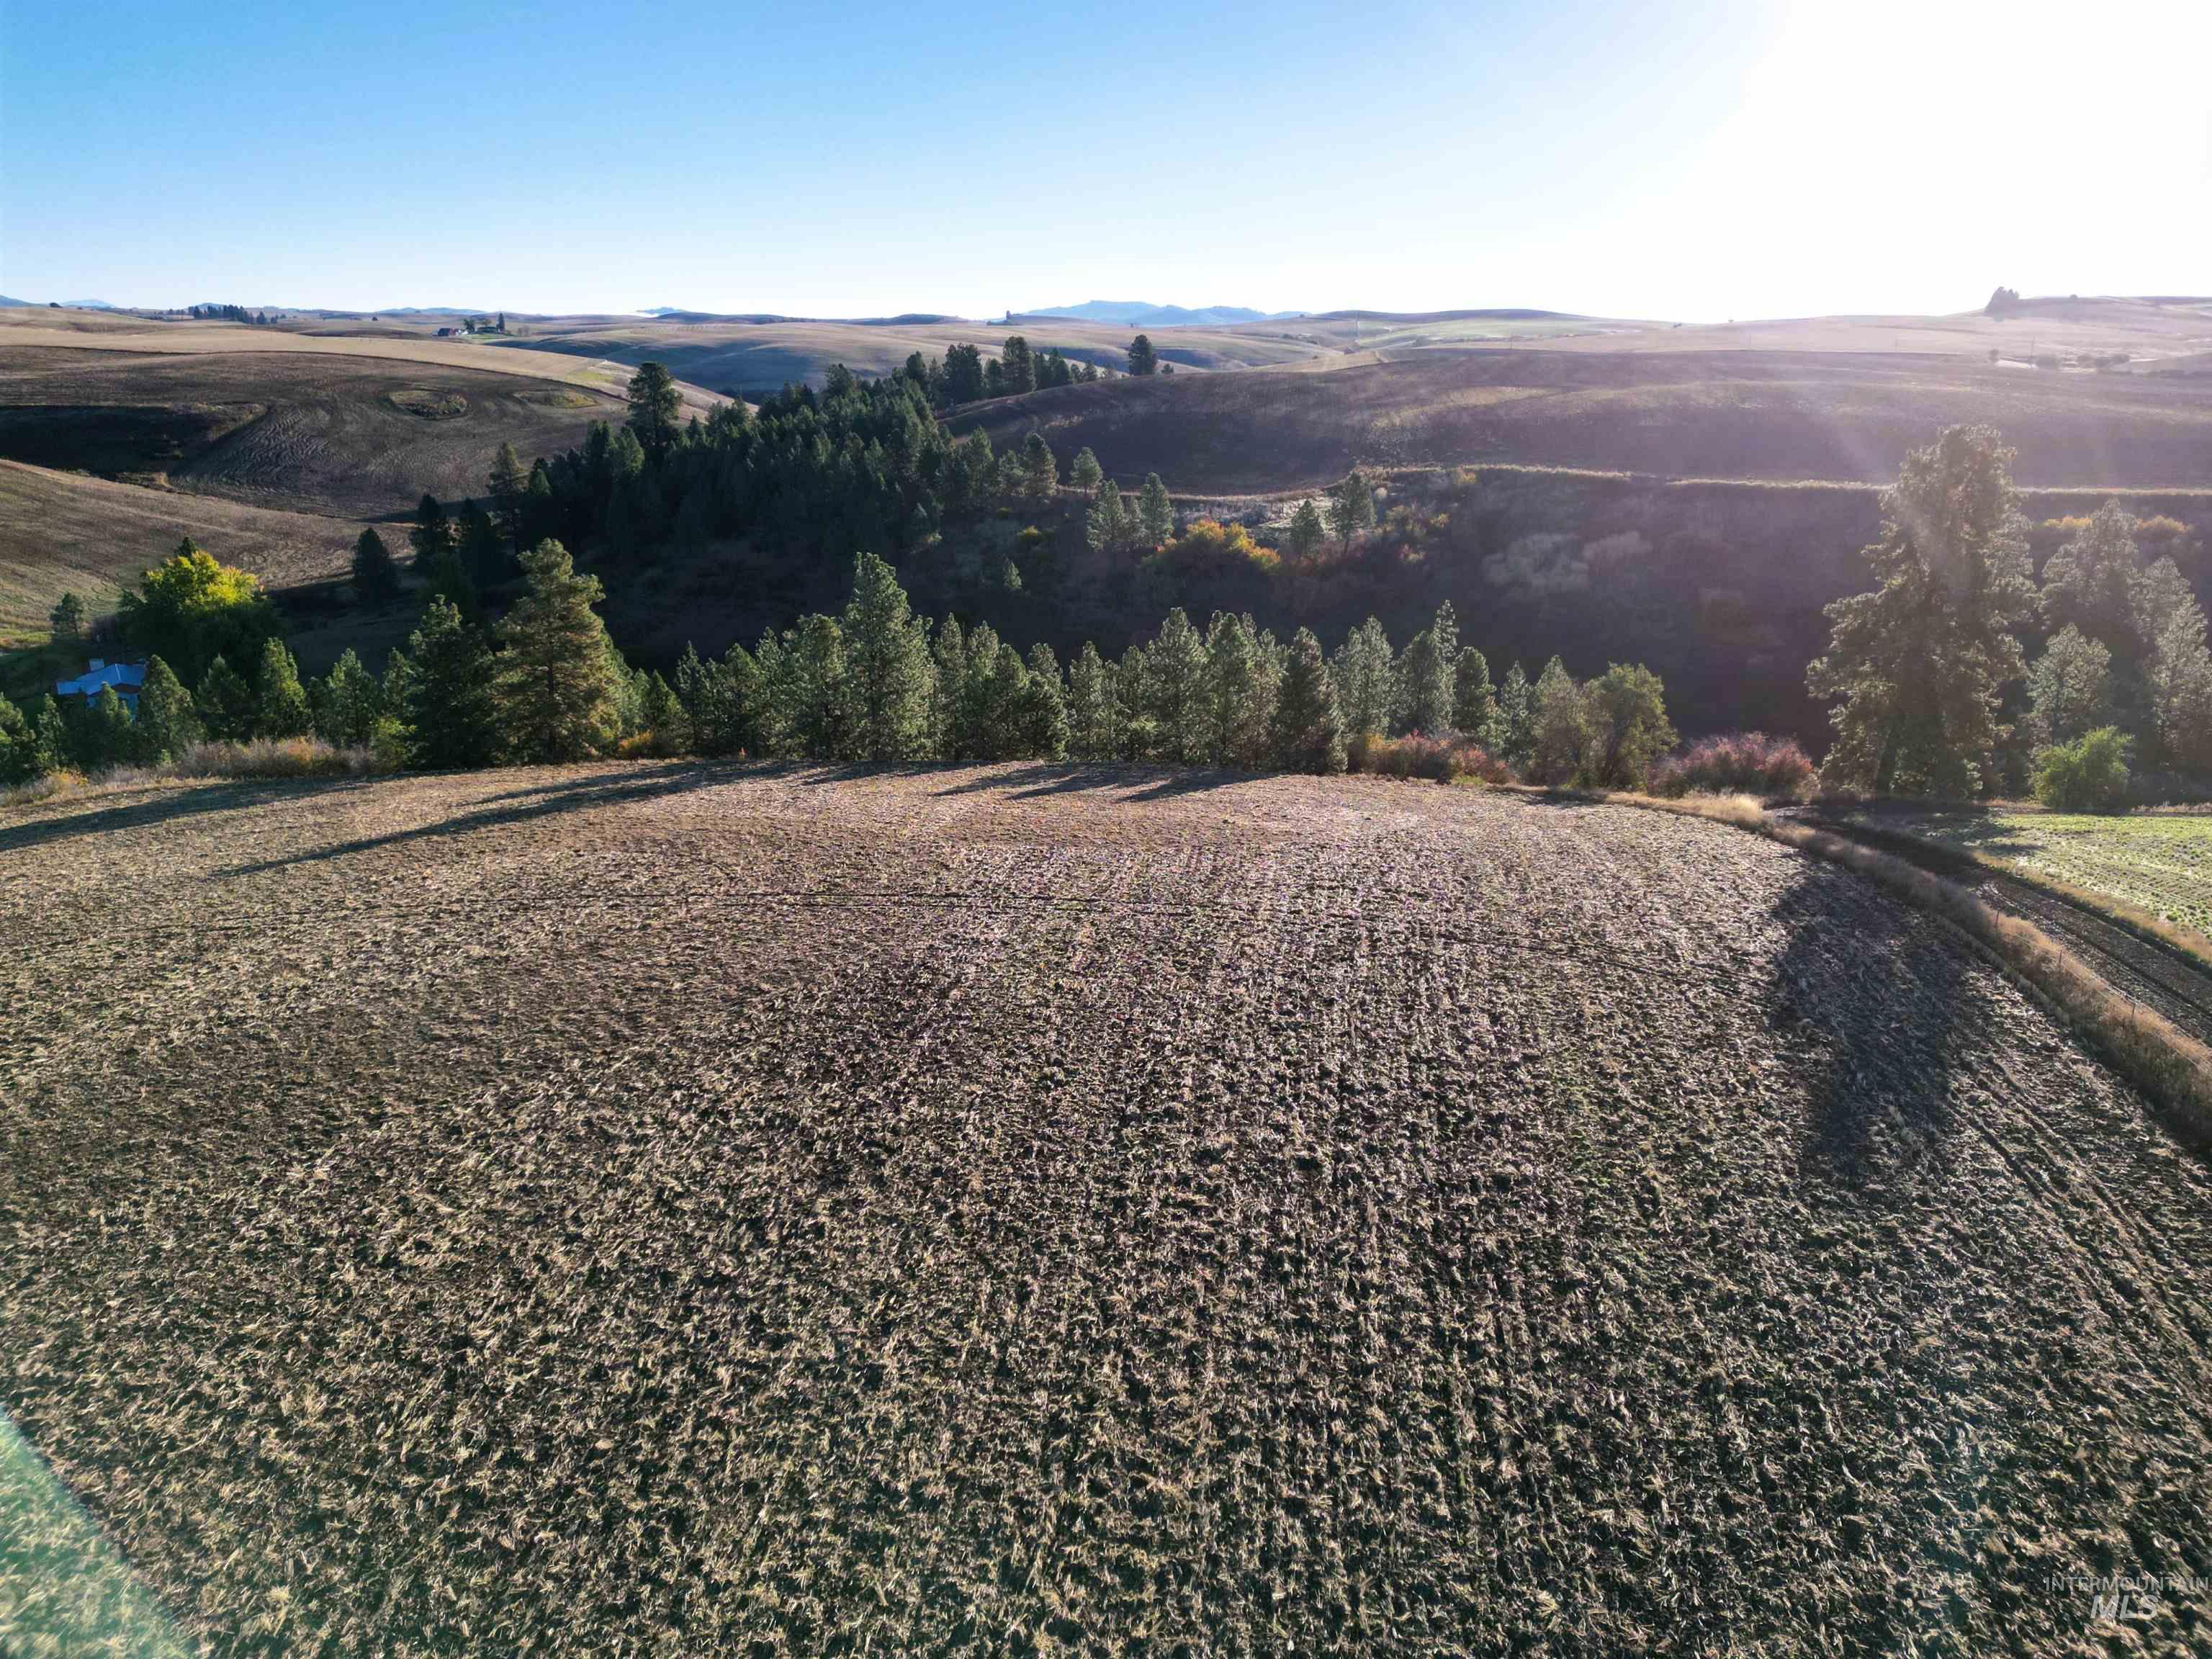 000 Reil/South/Parks Rd., Kendrick, Idaho 83537, Land For Sale, Price $499,999,MLS 98891804